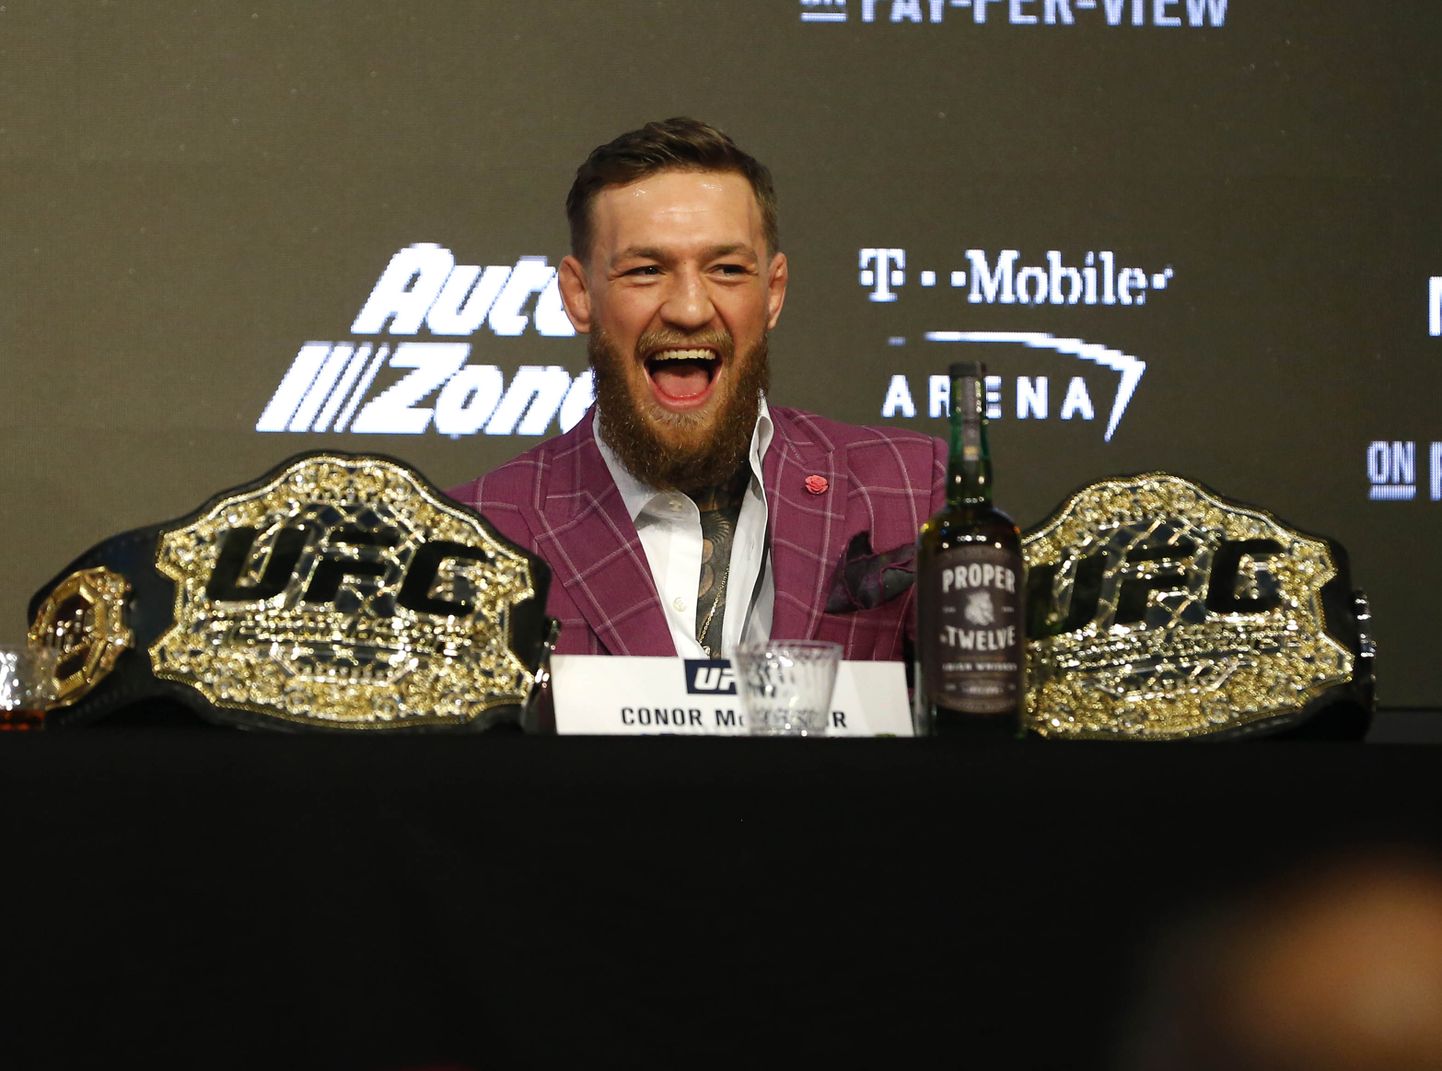 Sep 20, 2018; New York, NY, USA; Conor McGregor speaks during a press conference for UFC 229 at Radio City Music Hall. Mandatory Credit: Noah K. Murray-USA TODAY Sports